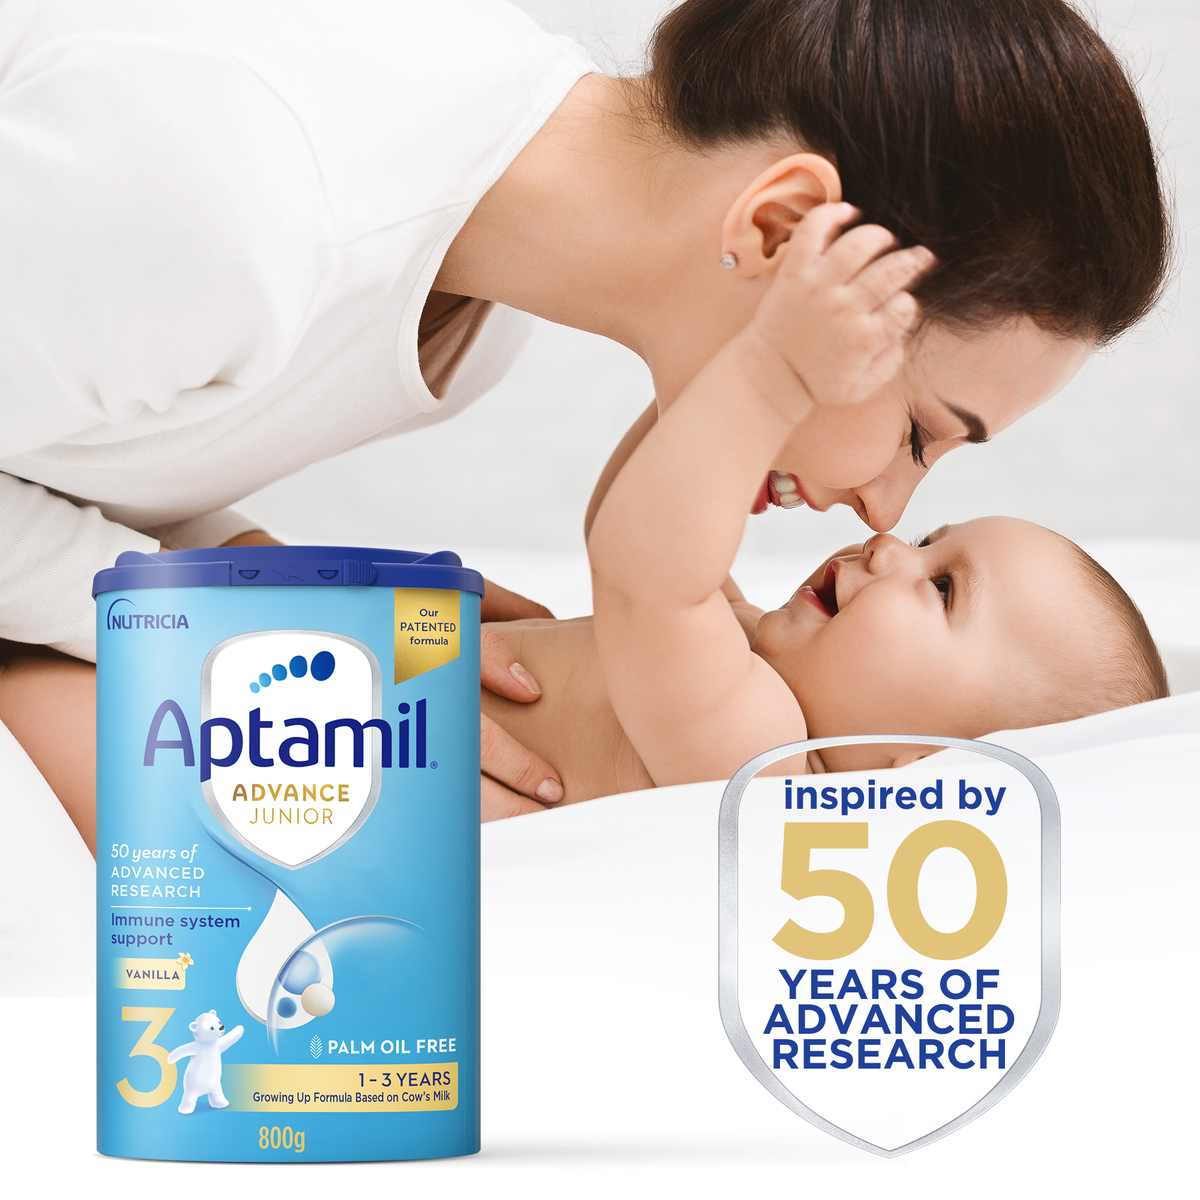 Aptamil Advance Junior Stage 3 Growing Up Formula Vanilla Flavour From 1-3 Years Value Pack 2 x 800 g